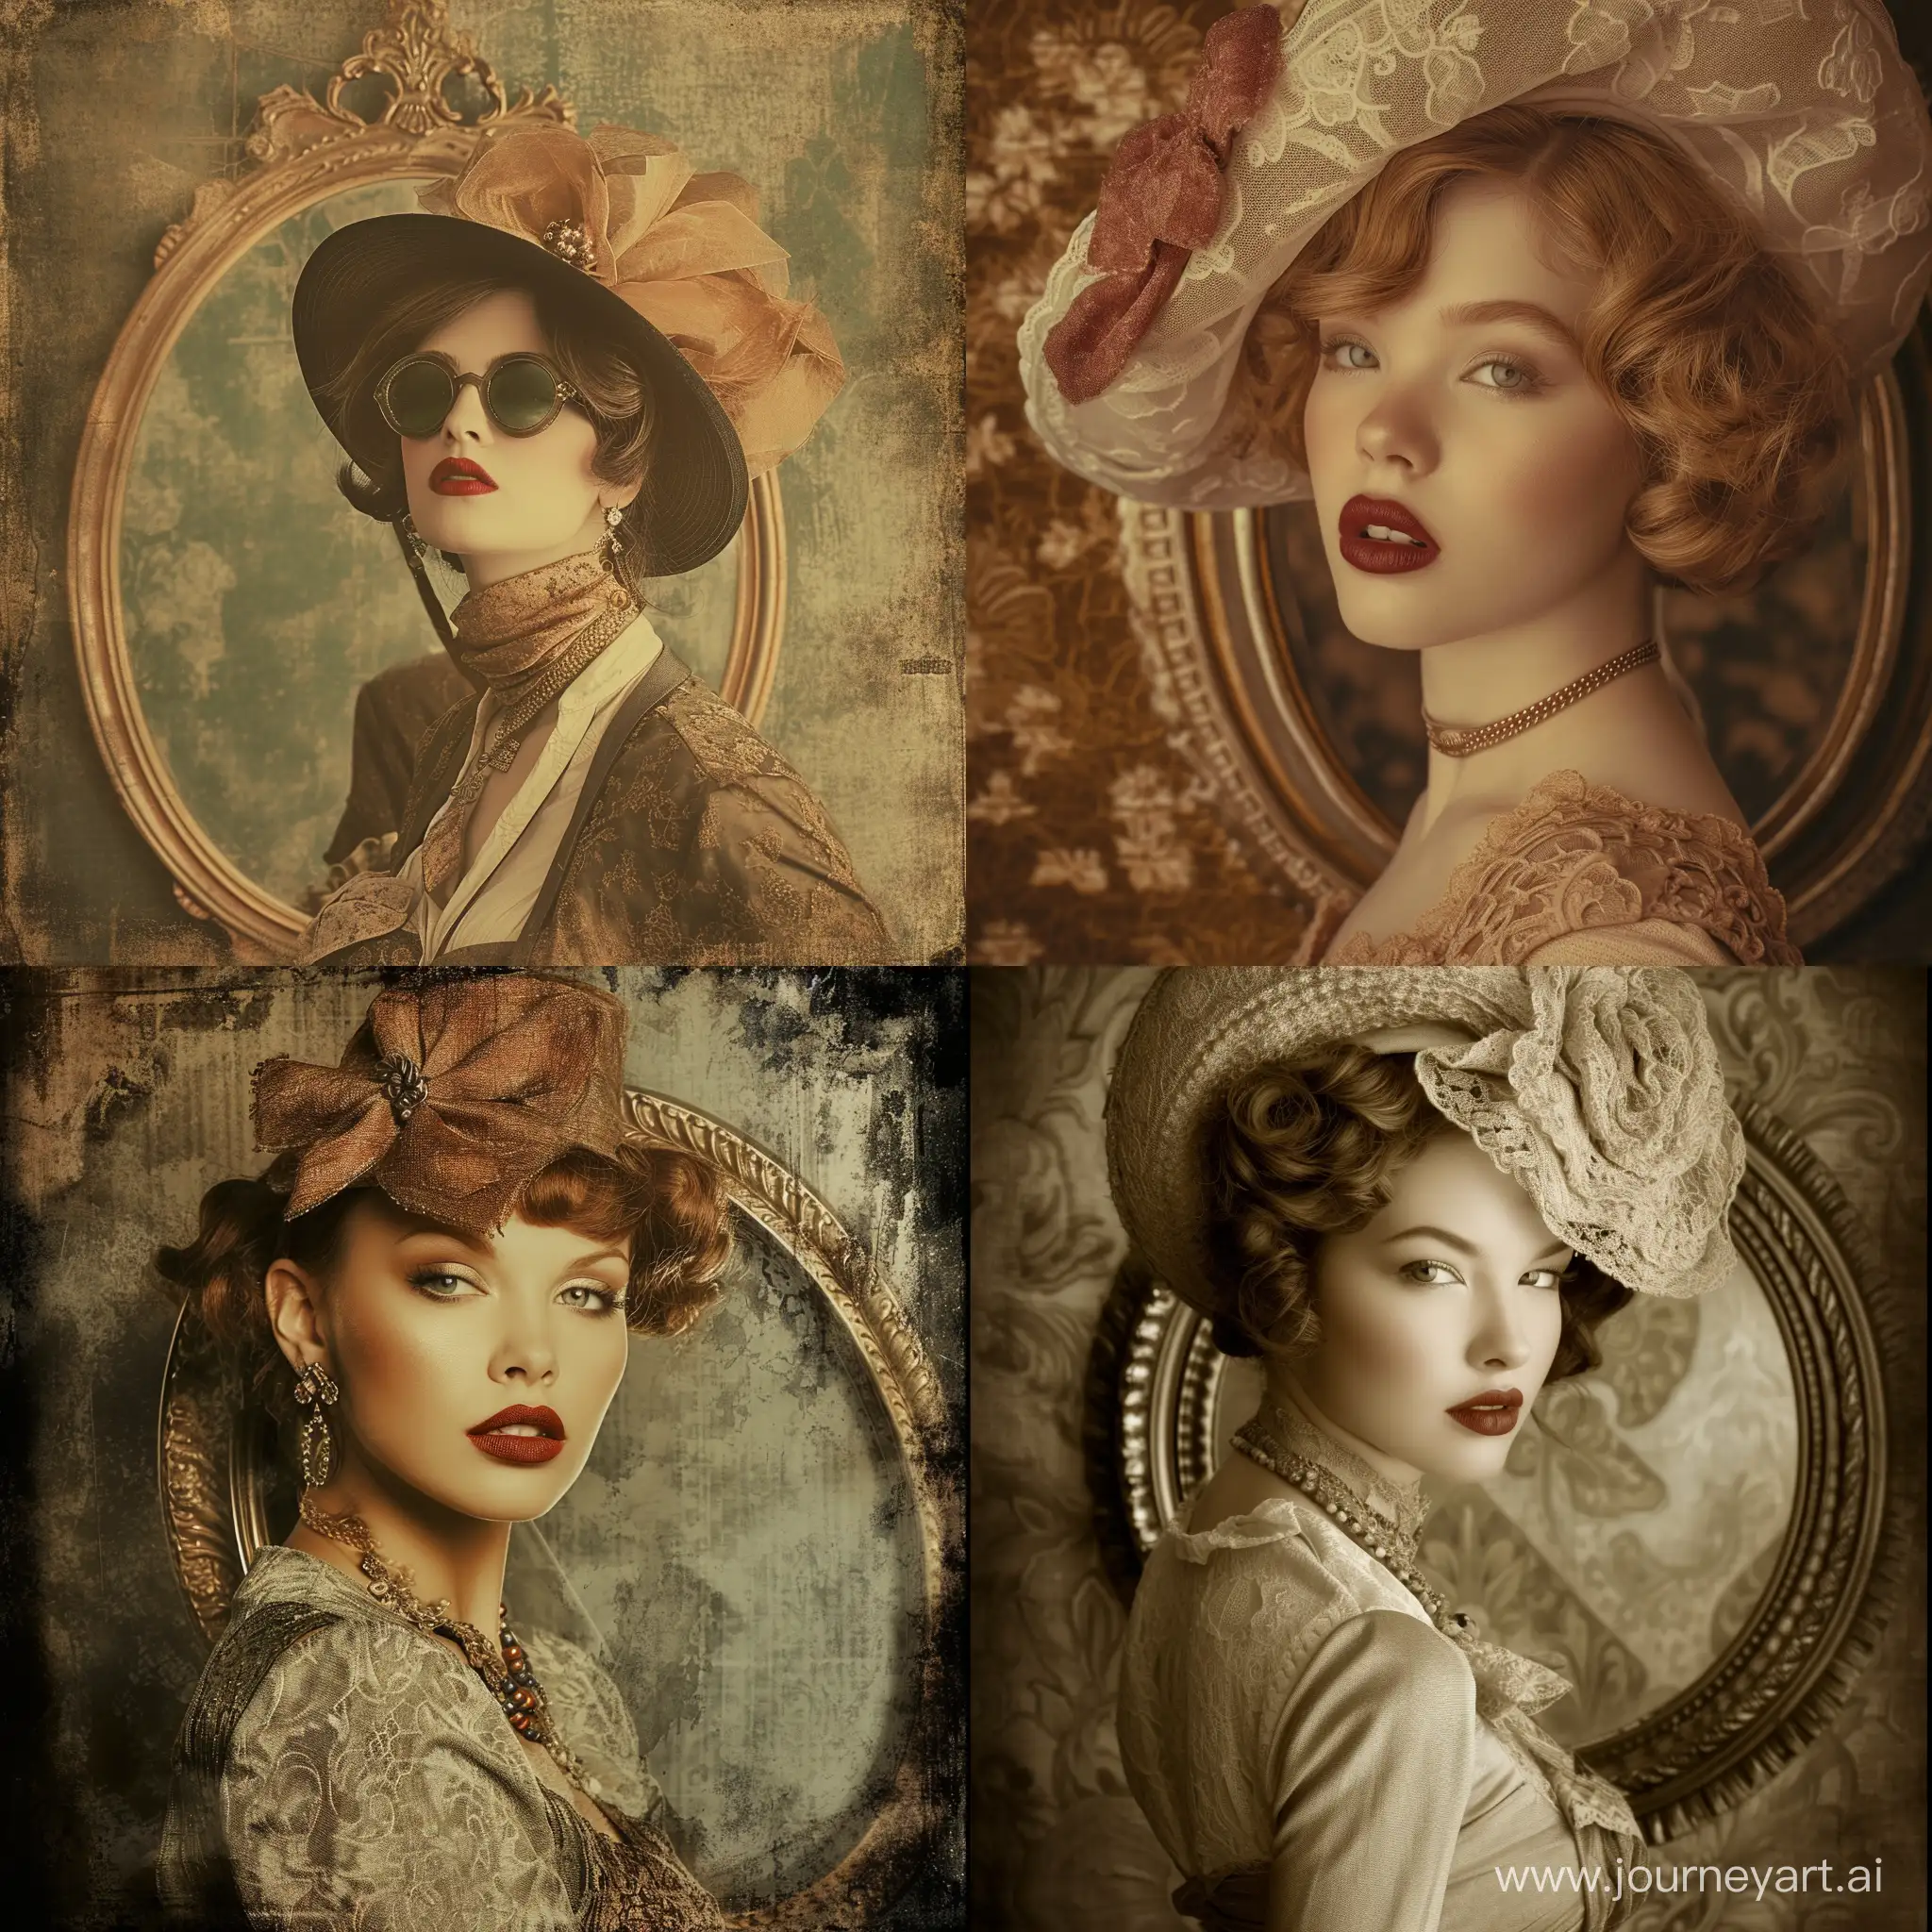 Subject: The main subject of the image is a self-portrait captured with a vintage aesthetic, showcasing a fashionable look. Setting or Background: The background exudes a nostalgic atmosphere, with elements that complement the vintage theme, such as sepia tones or aged textures. Style/Coloring: The image adopts a classic style reminiscent of old photographs, with warm, muted colors and subtle contrasts, enhancing the vintage feel. Action: The subject is posed in a confident and stylish manner, highlighting the fashion choices and expressing a sense of self-assuredness. Items: The image features a vintage mirror, adding a reflective element to the composition, and the fashion choices include carefully curated clothing and accessories. Costume or Appearance: The subject's attire reflects a blend of contemporary fashion with a touch of retro elegance, contributing to a unique and eye-catching appearance. Accessories: Accessories like jewelry, hats, or scarves are strategically chosen to complement the overall vintage look, adding layers of detail and visual interest.